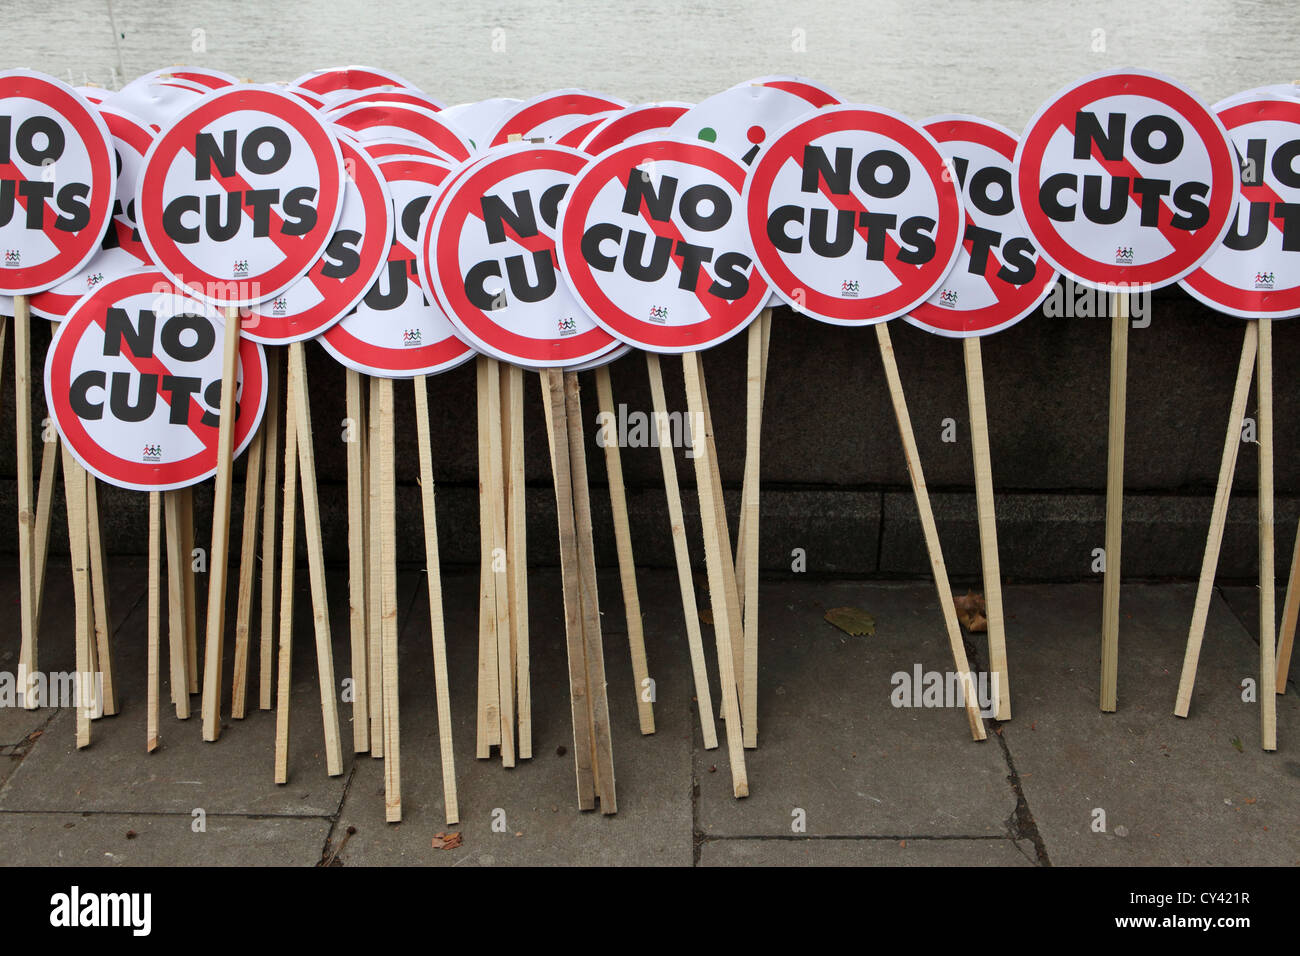 Numerous 'No Cuts' protest placards awaiting collection by protesters, A Future that Works, London Stock Photo